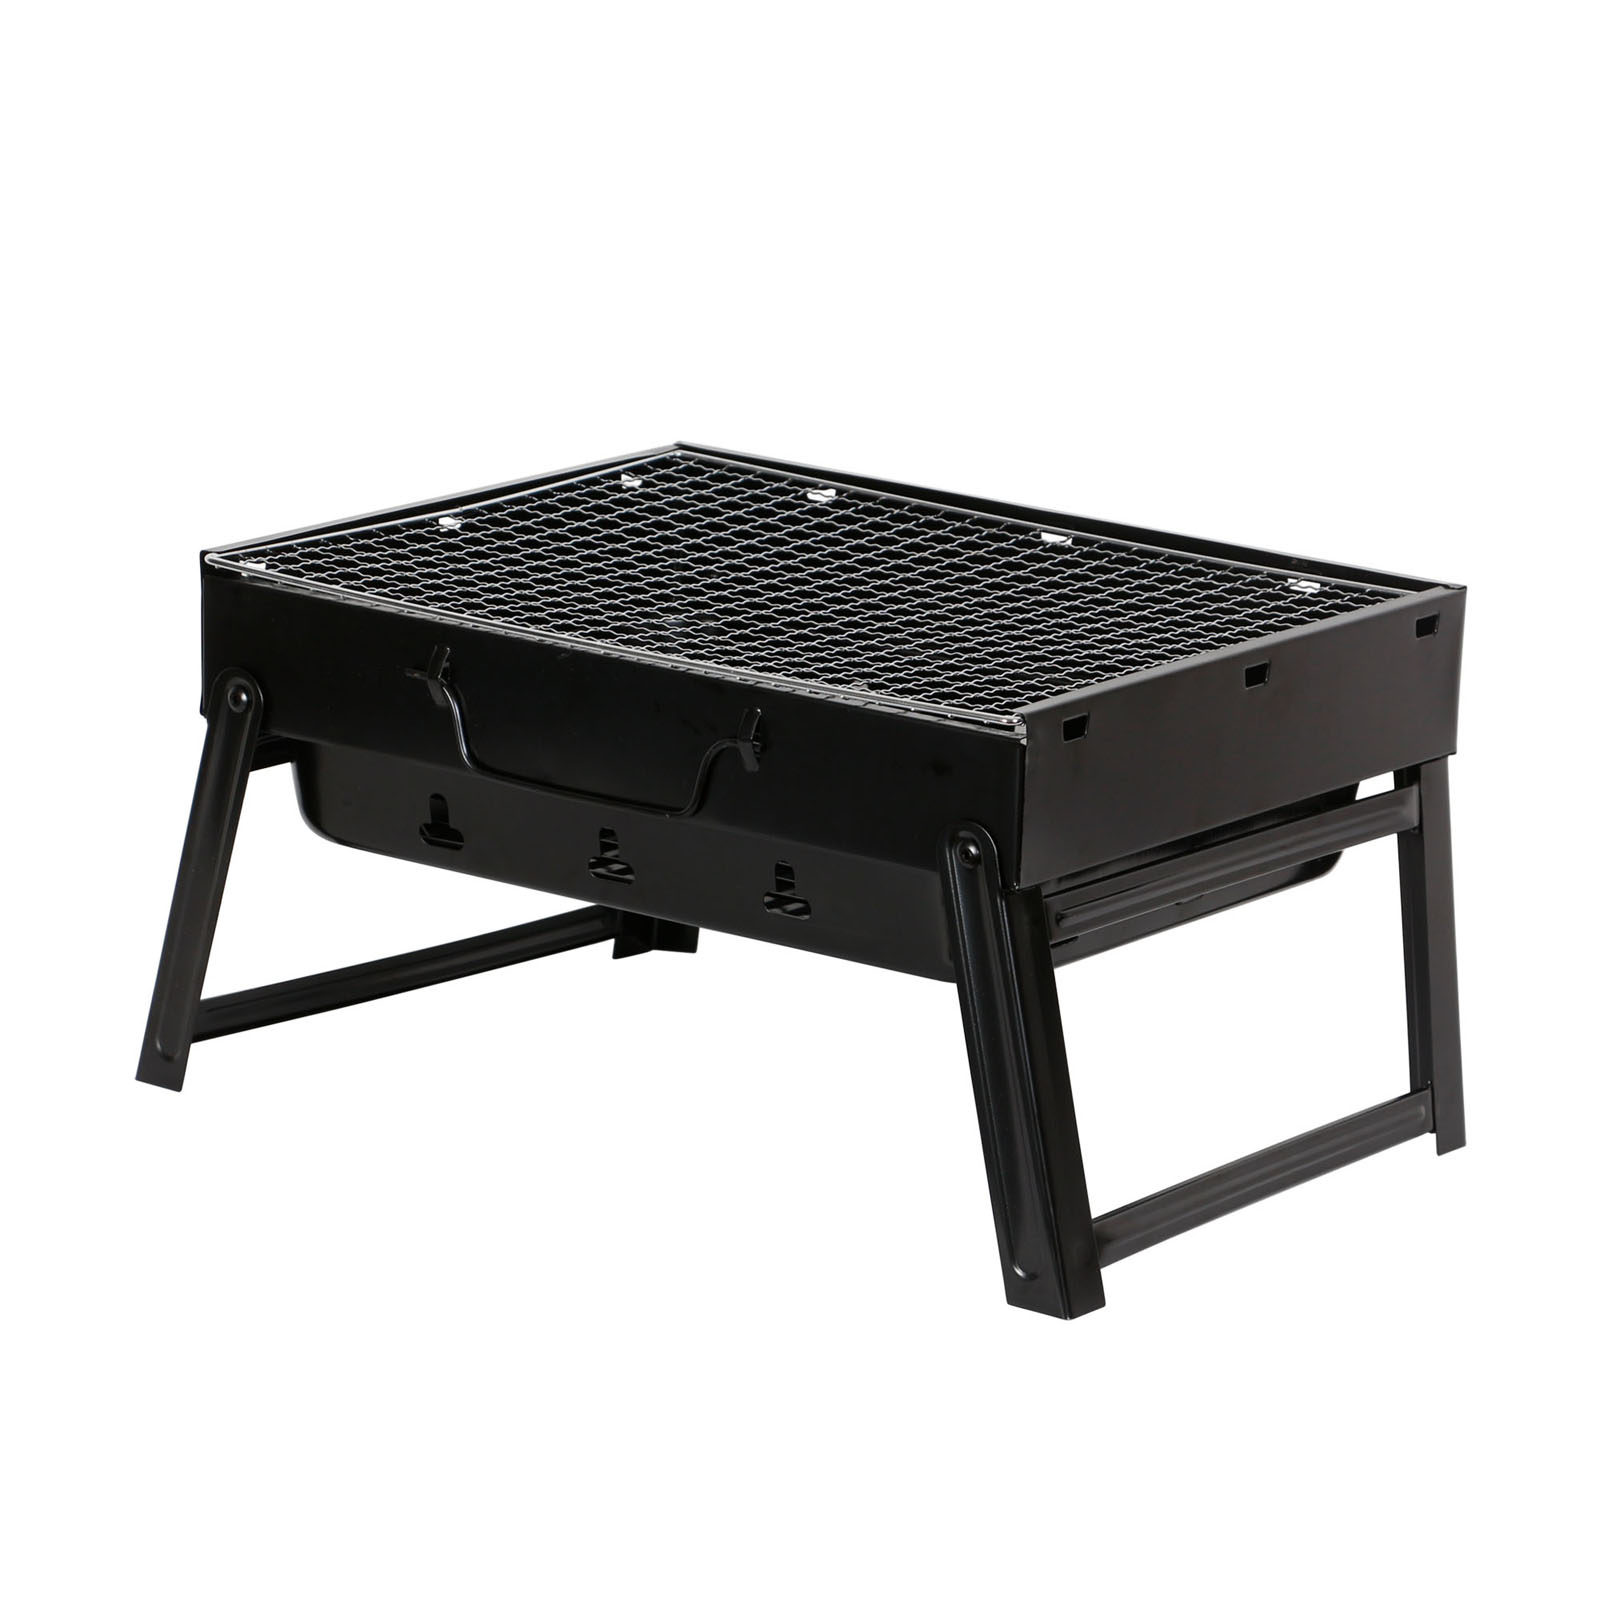 Tragbar Grill BBQ Camping Klappgrill Standgrill Holzkohlegrill Tischgrill D-Stor 